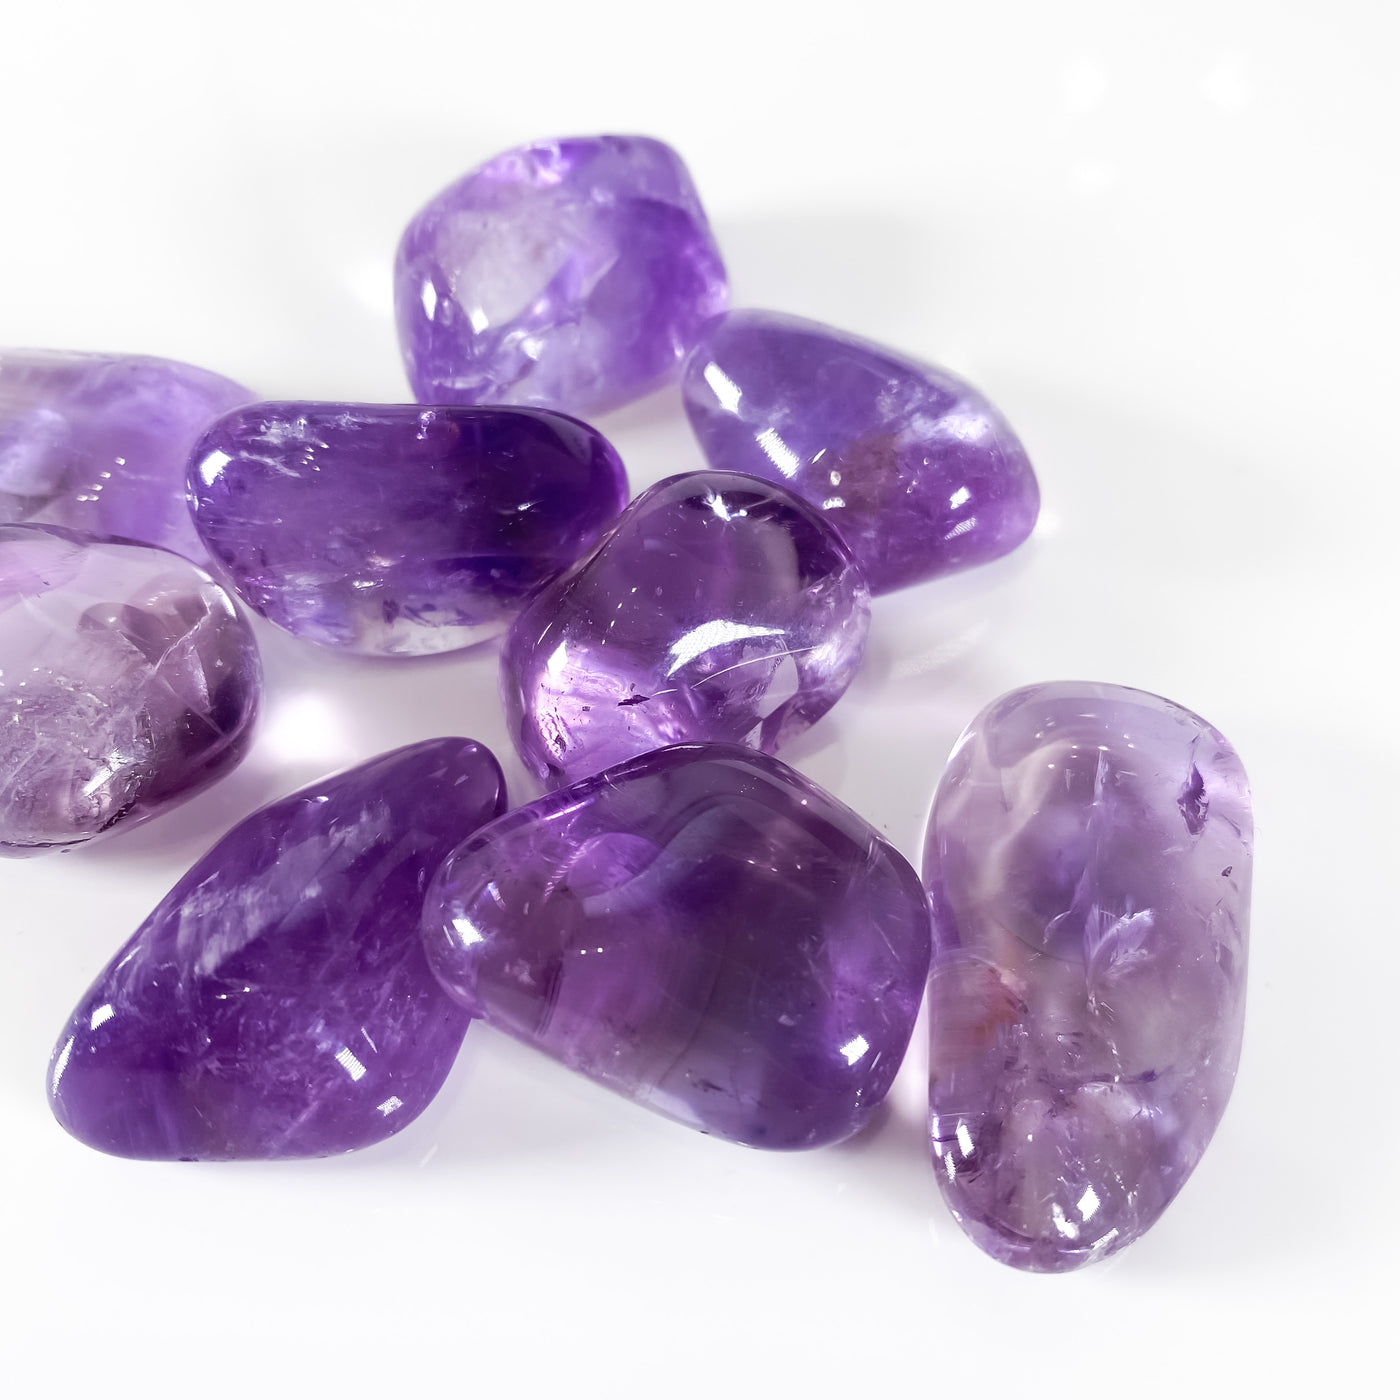 Tumbled Amethyst for Transformation